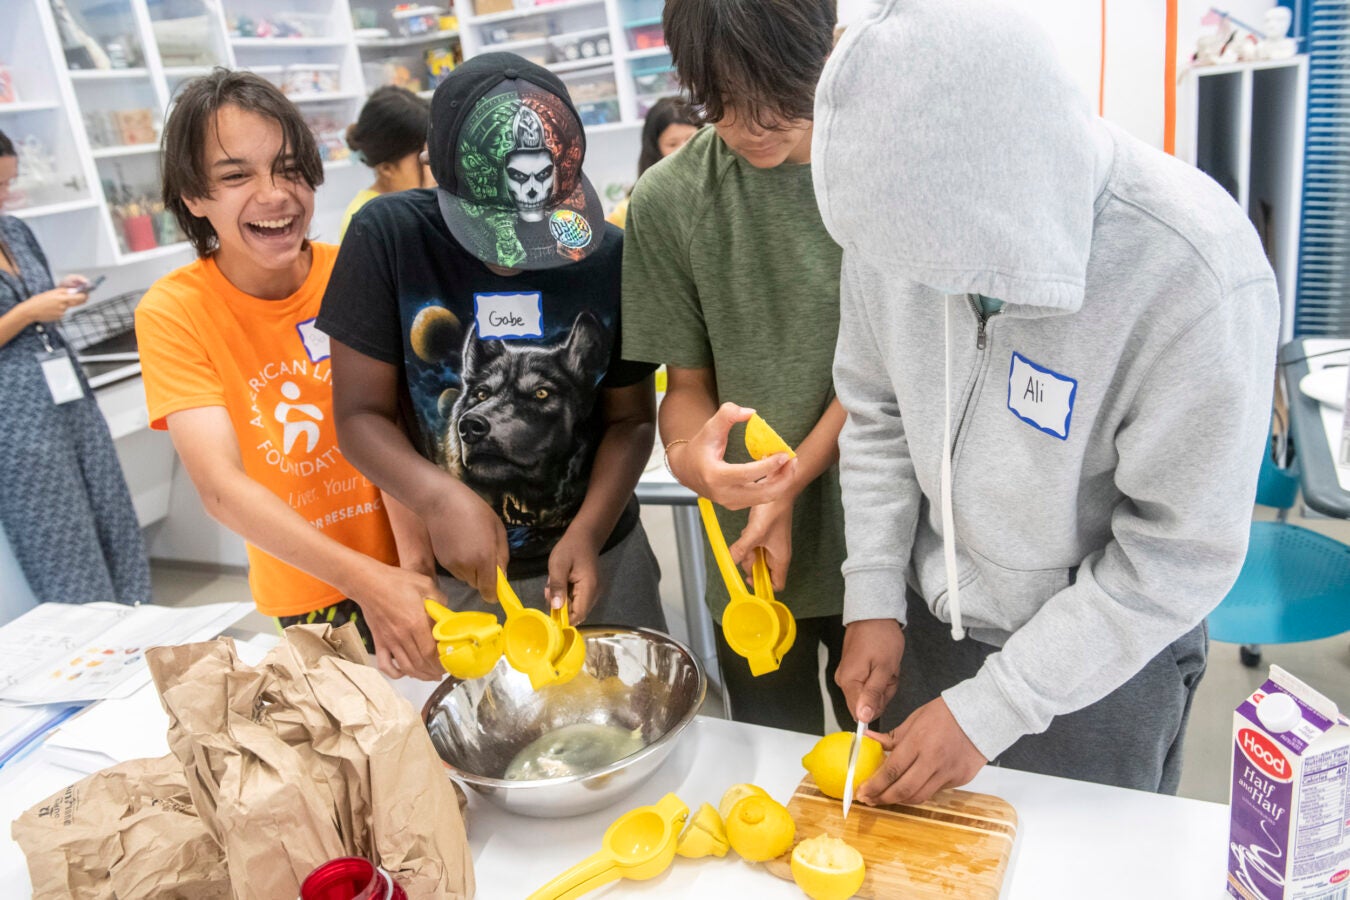 Students squeeze lemons to produce juice.